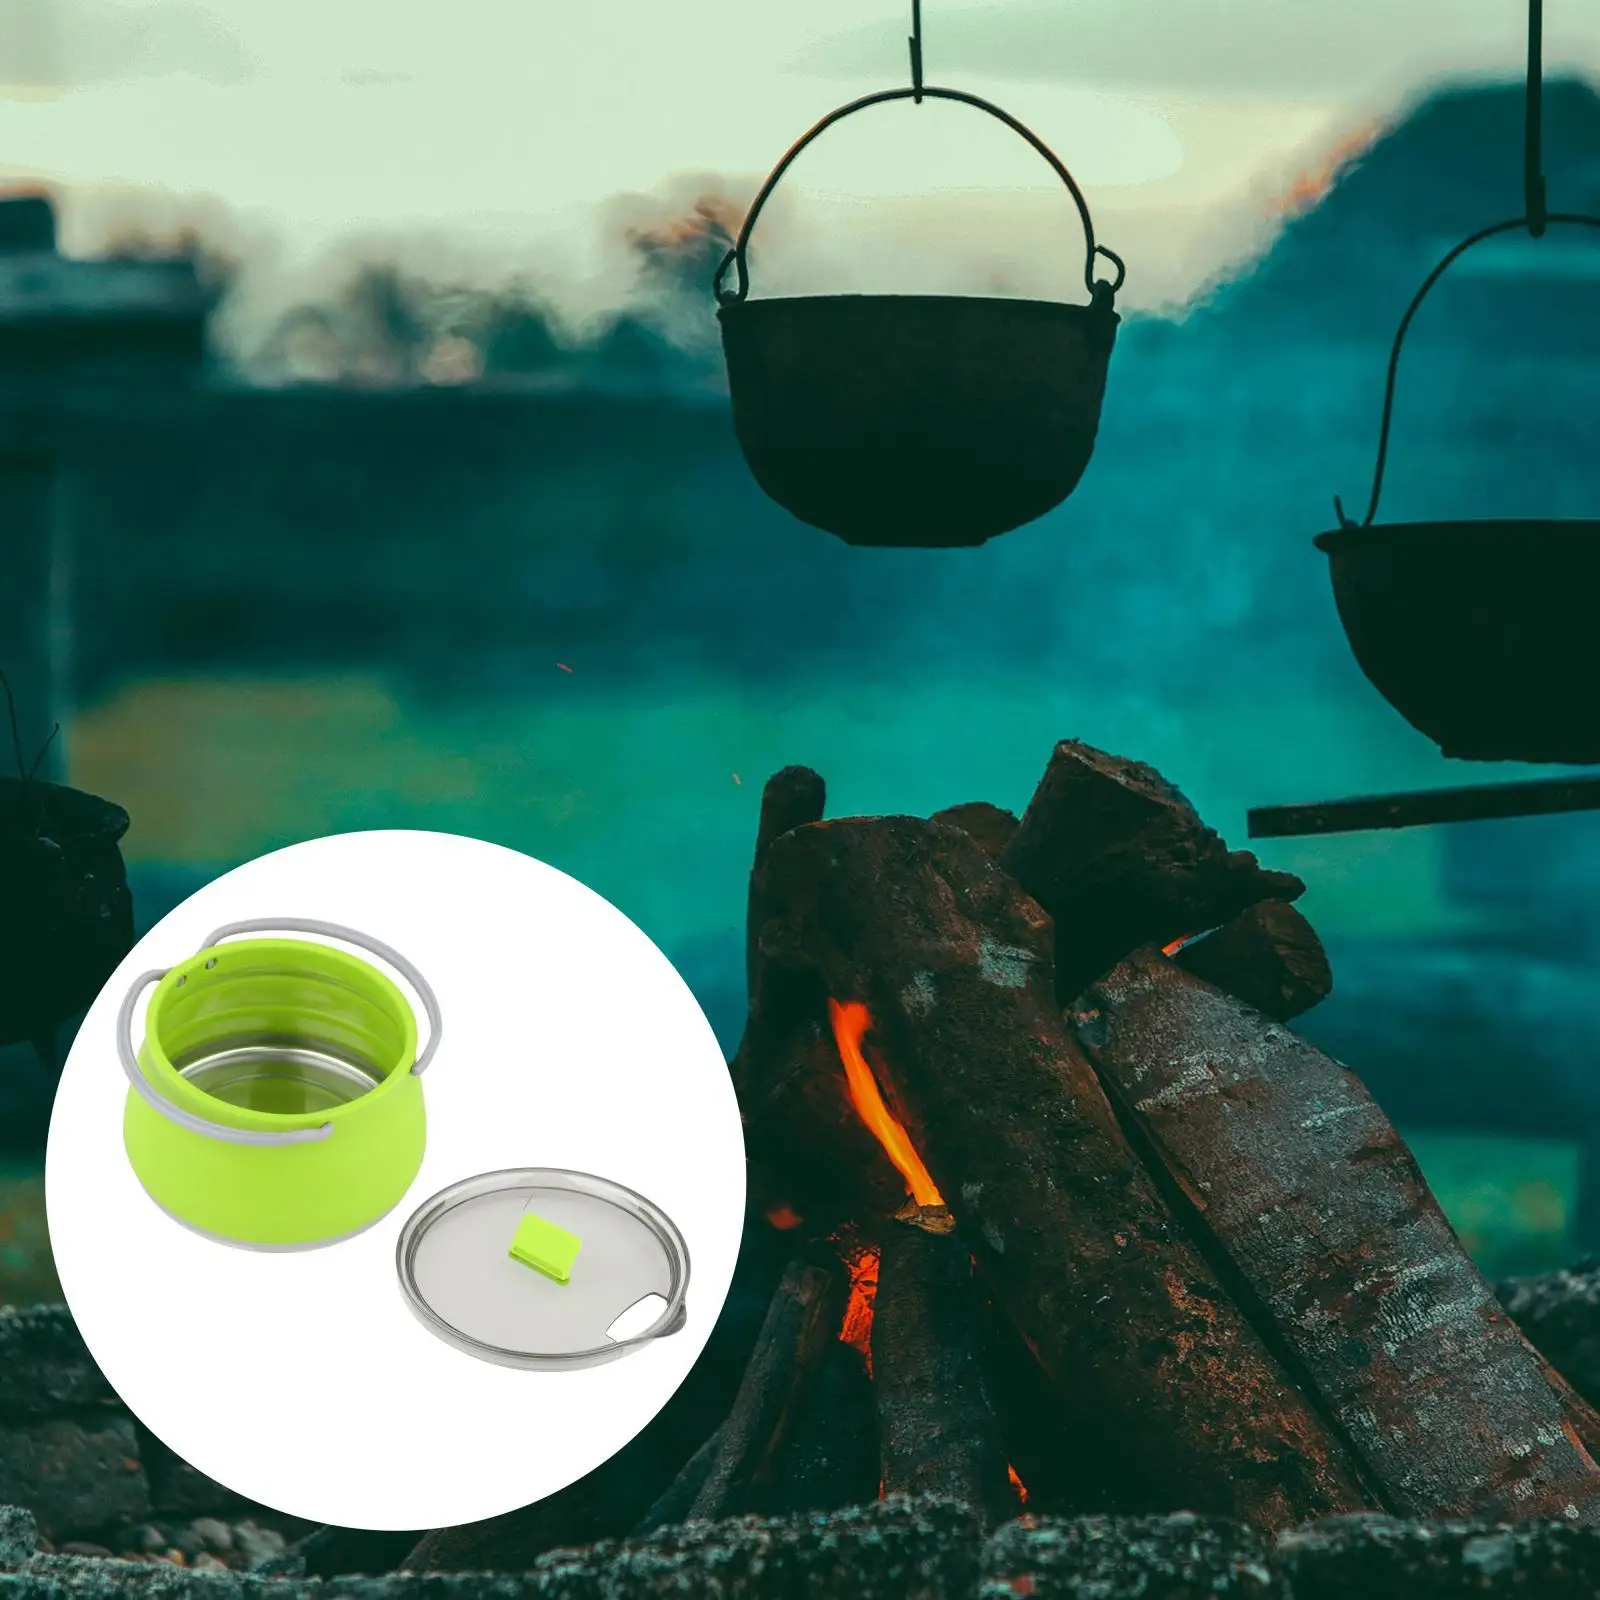 1L Camping Silicone Folding Kettle Collapsible Cooking Pot Hiking pot Backpacking Travel